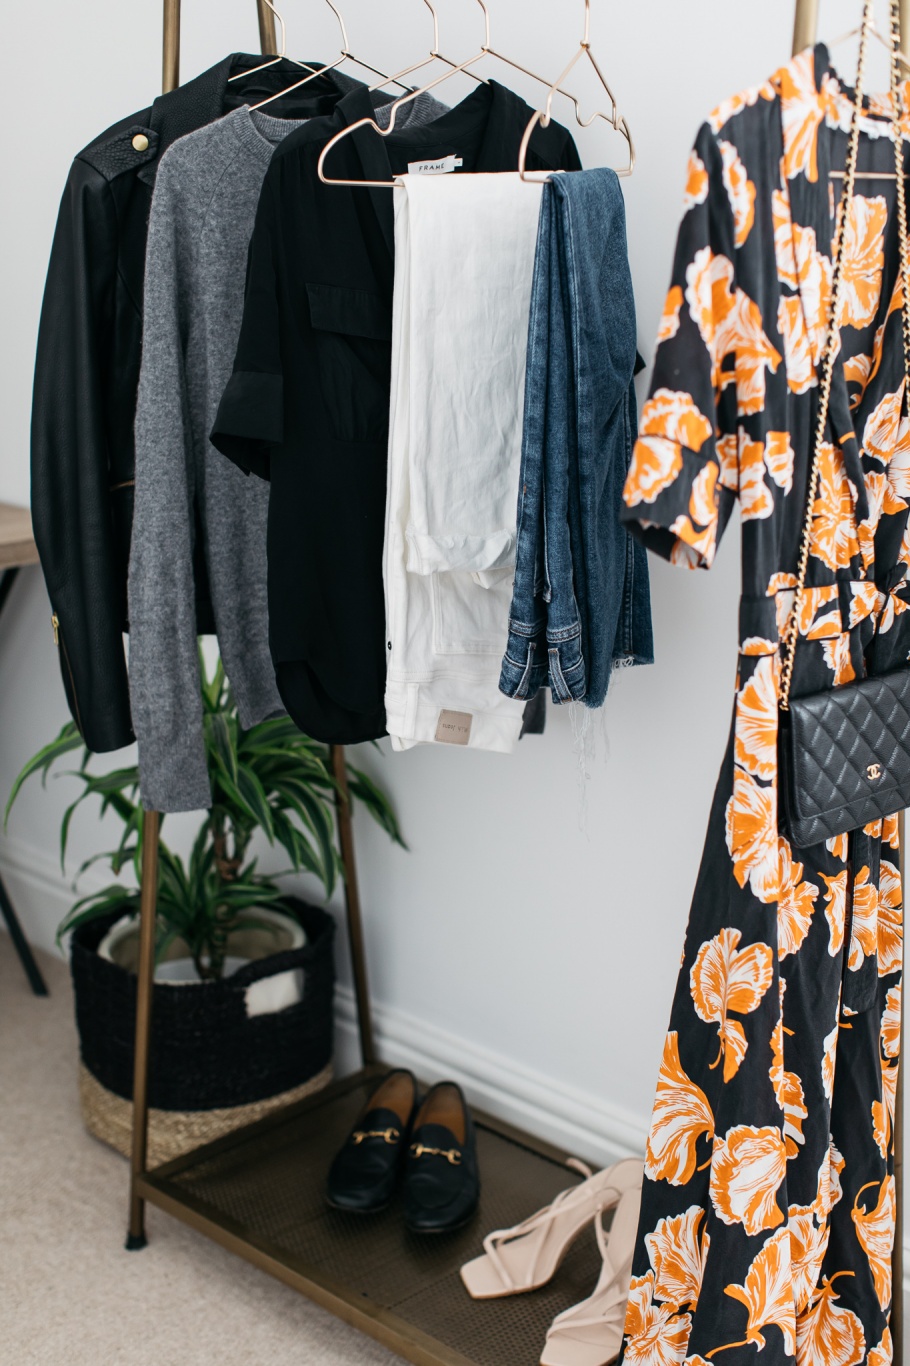 The Five Steps To Making a Good Style Investment – The Anna Edit